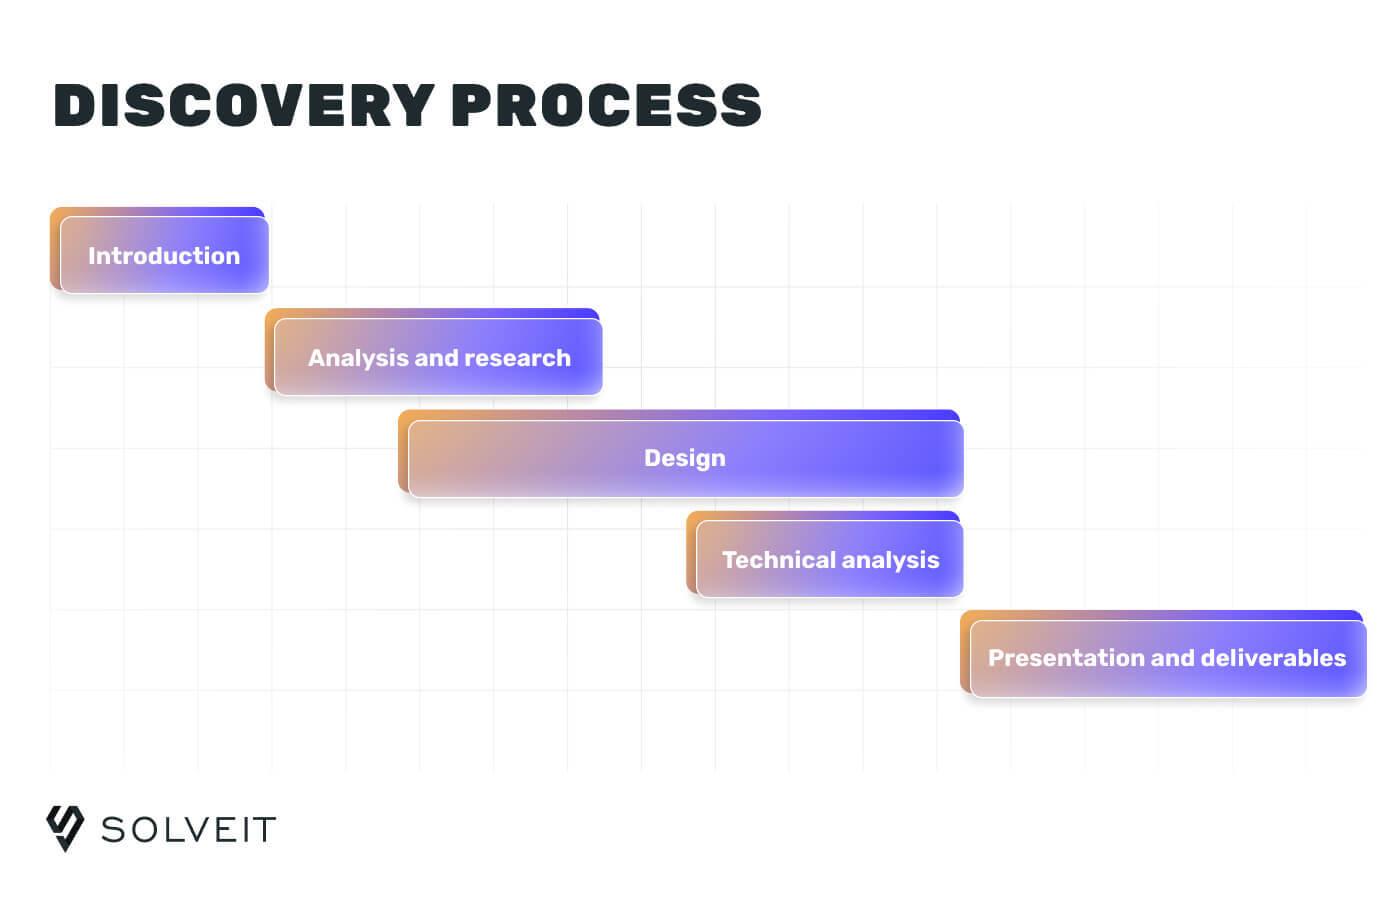 What happens in discovery phase?